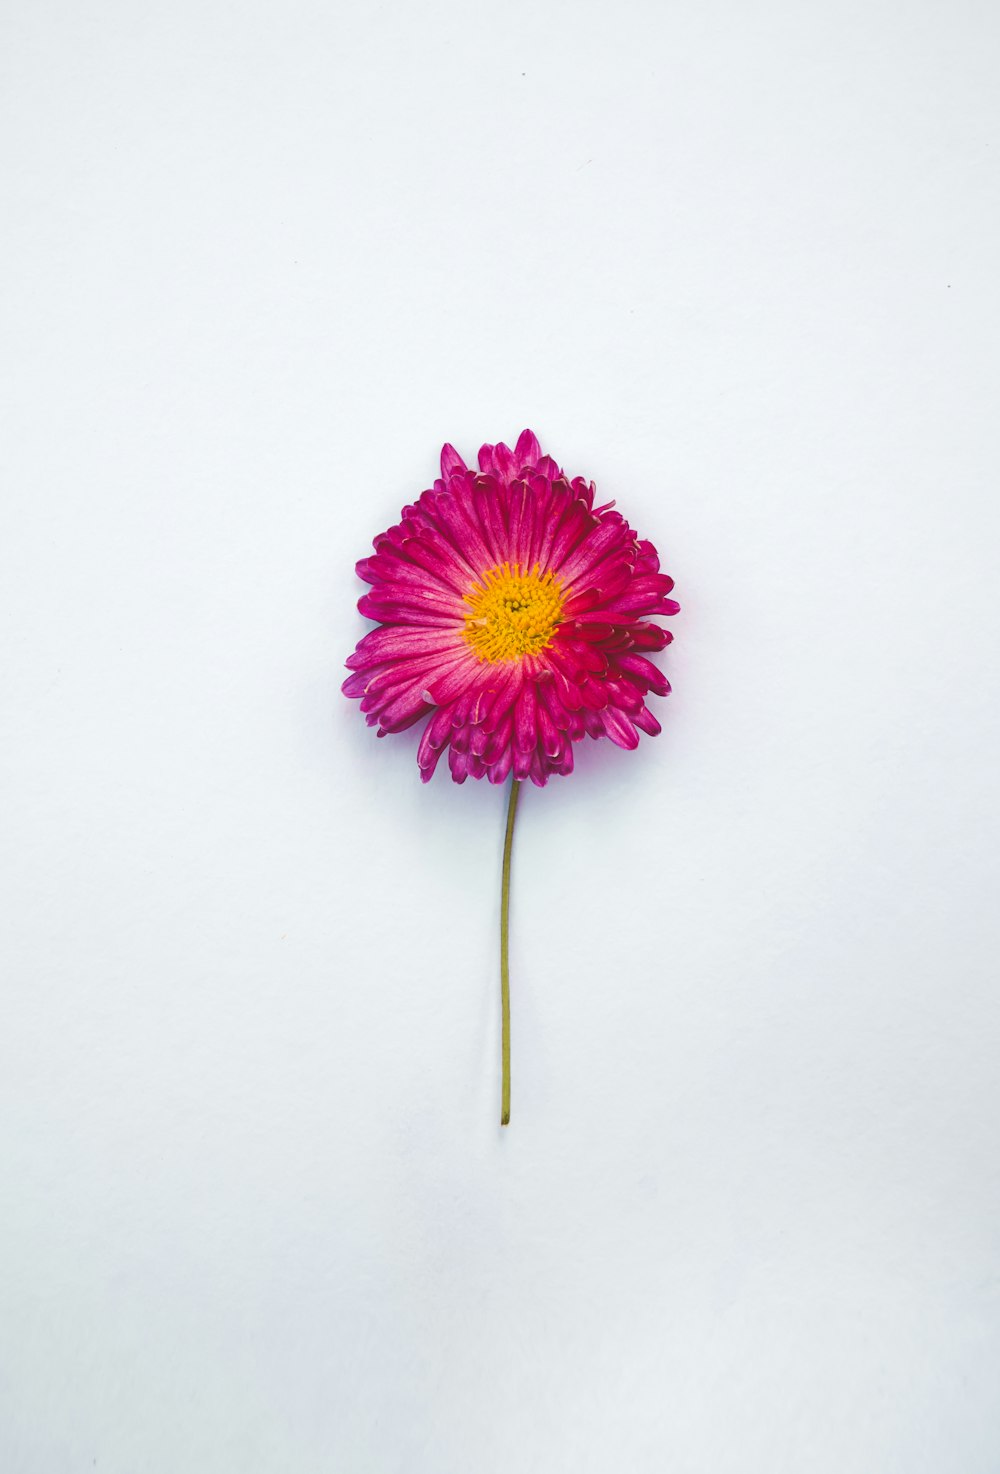 a single pink flower on a white background